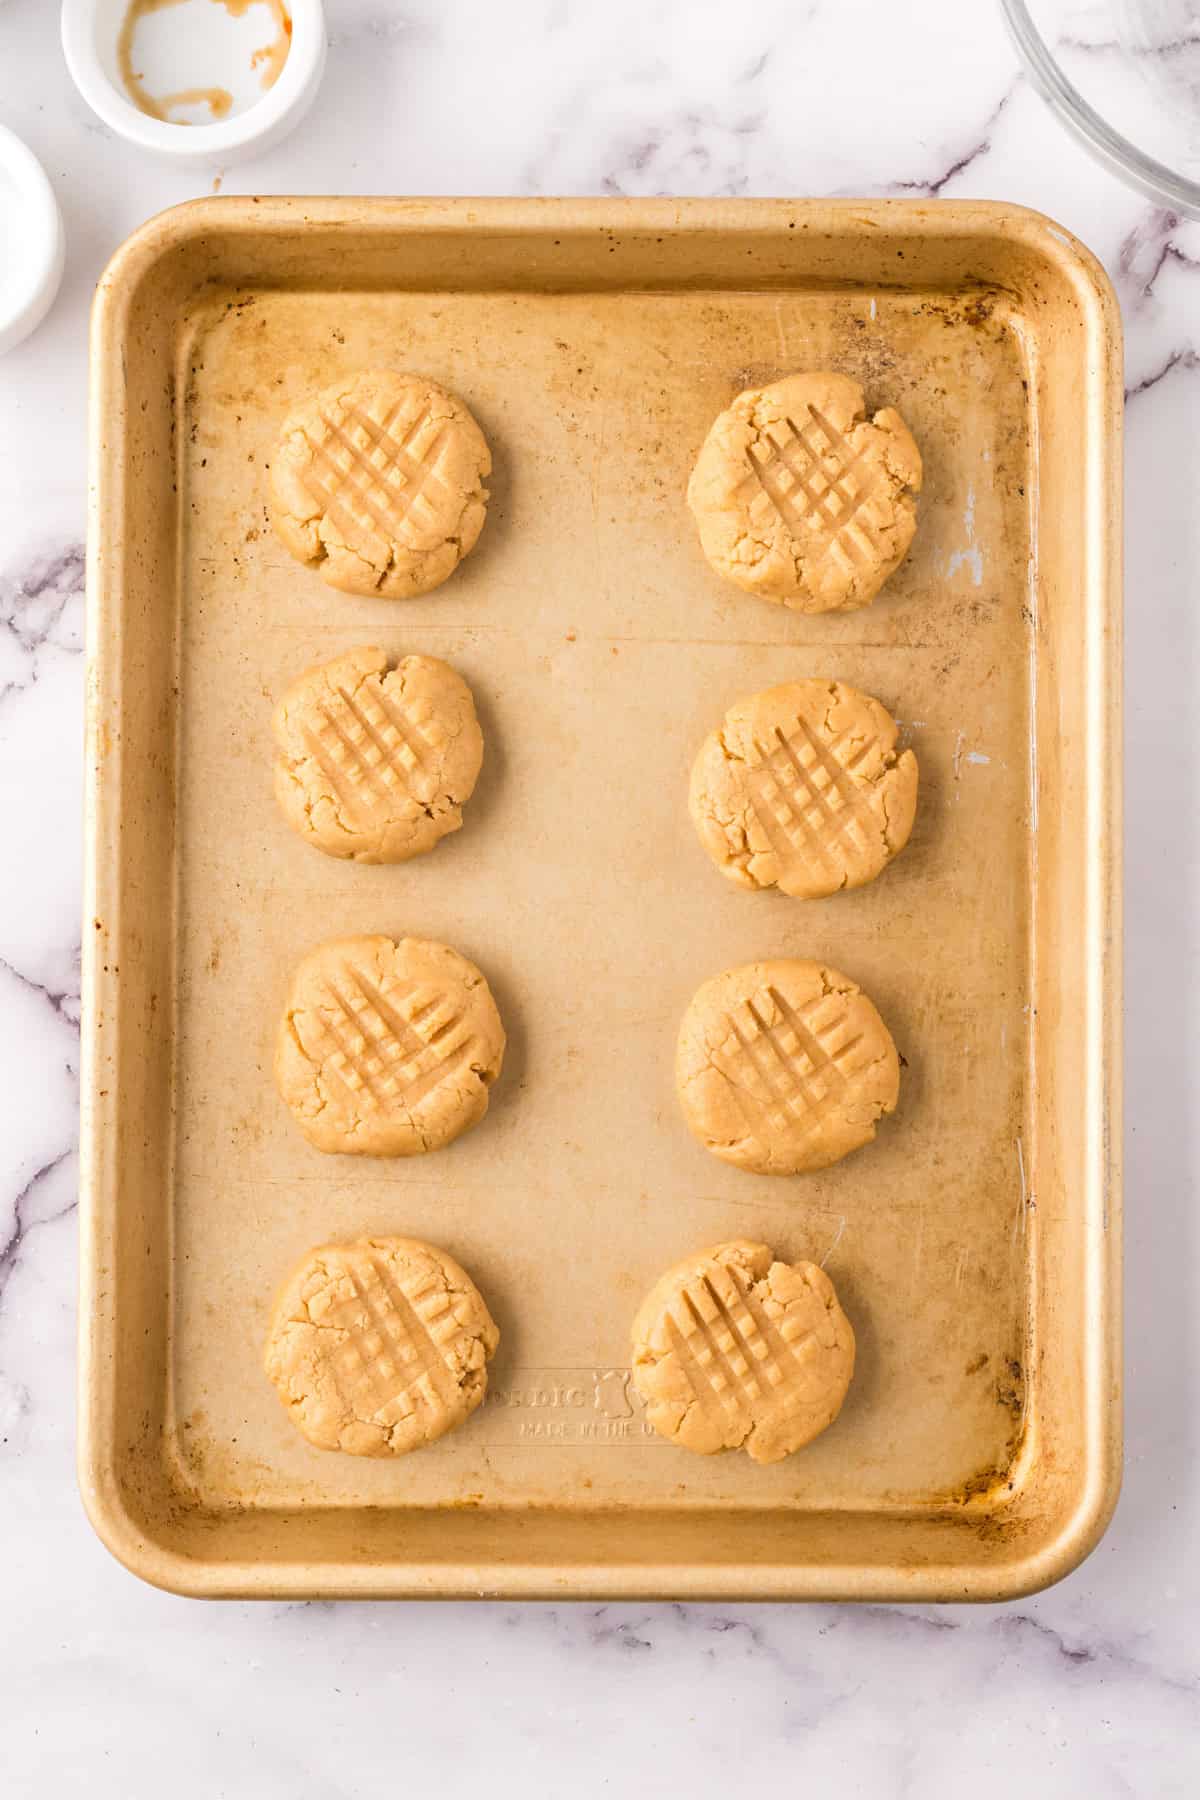 sheet pan with 8 peanut butter cookies ready to bake.